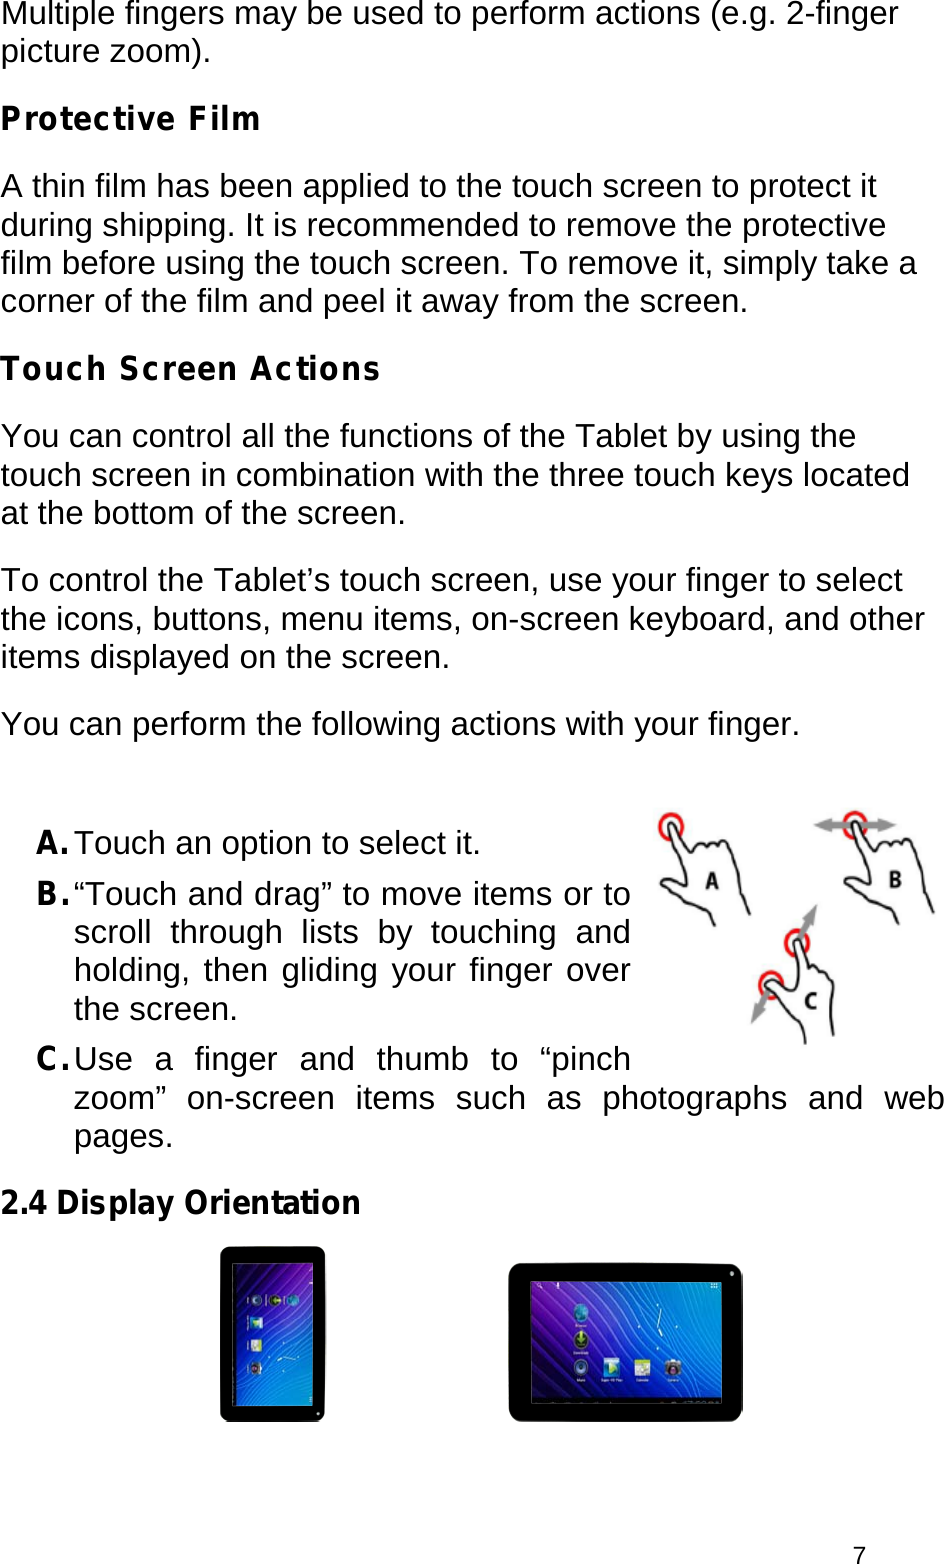  7 Multiple fingers may be used to perform actions (e.g. 2-finger picture zoom). Protective Film A thin film has been applied to the touch screen to protect it during shipping. It is recommended to remove the protective film before using the touch screen. To remove it, simply take a corner of the film and peel it away from the screen. Touch Screen Actions You can control all the functions of the Tablet by using the touch screen in combination with the three touch keys located at the bottom of the screen.  To control the Tablet’s touch screen, use your finger to select the icons, buttons, menu items, on-screen keyboard, and other items displayed on the screen. You can perform the following actions with your finger.  A. Touch an option to select it. B. “Touch and drag” to move items or to scroll through lists by touching and holding, then gliding your finger over the screen. C. Use a finger and thumb to “pinch zoom” on-screen items such as photographs and web pages. 2.4 Display Orientation     